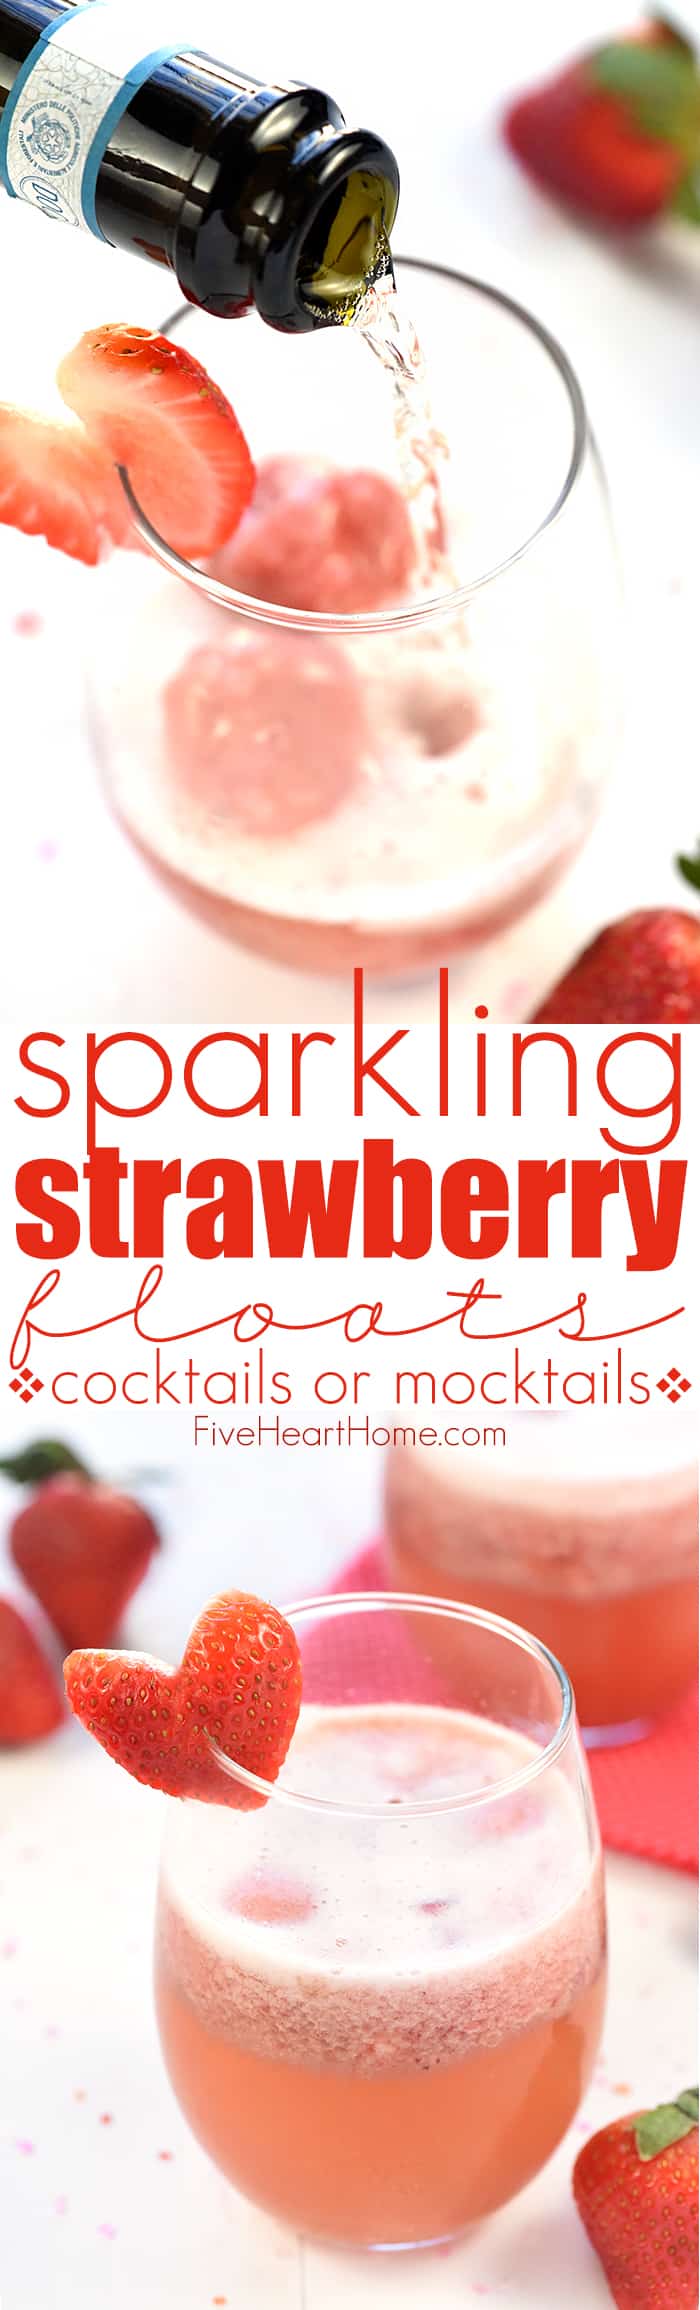 Sparkling Strawberry Floats | Valentine's Day Cocktails OR Mocktails ~ strawberry sorbet is topped with Prosecco in this sweet, bubbly drink recipe, perfect for Valentine's Day, baby or bridal showers, or a variety of special celebrations...and it's easy to make a yummy non-alcoholic version as well! | FiveHeartHome.com via @fivehearthome